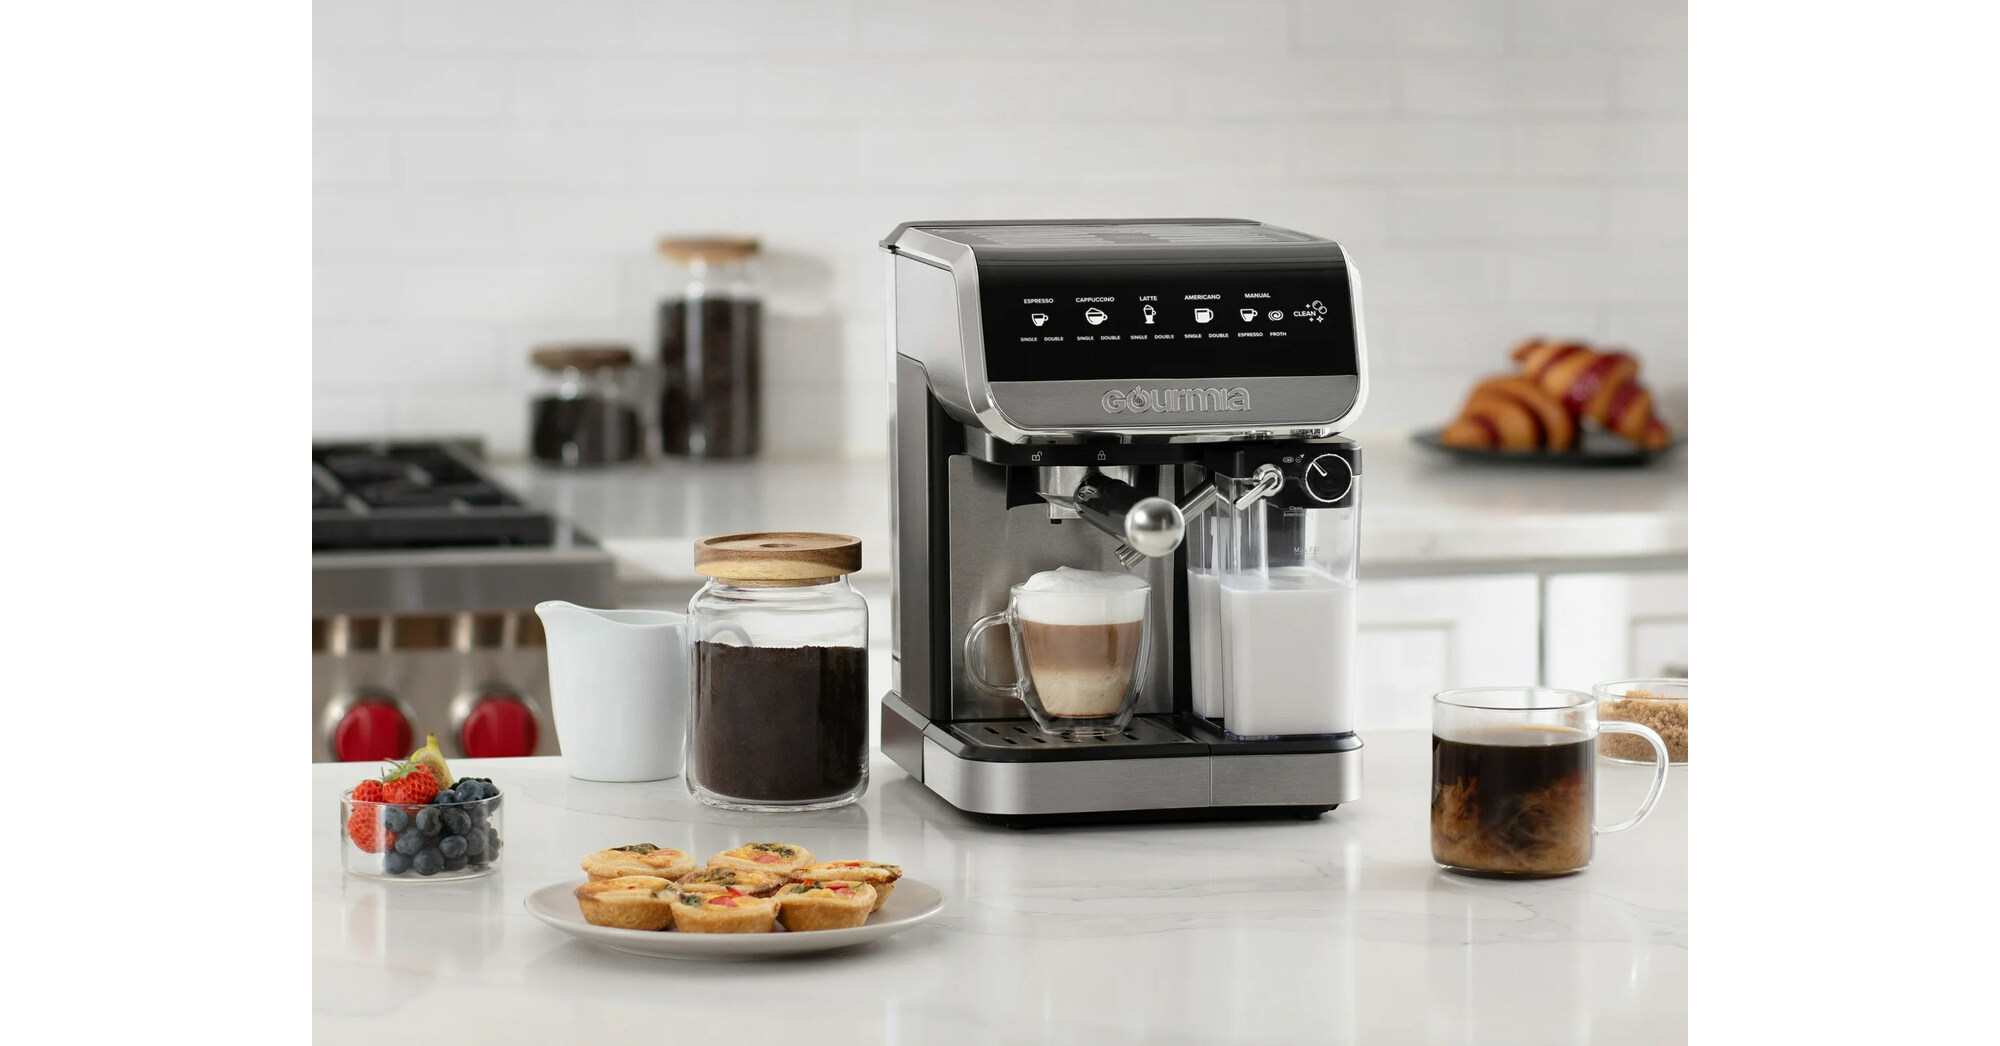 L'OR Barista offers industry-first double shot function - Appliance Retailer